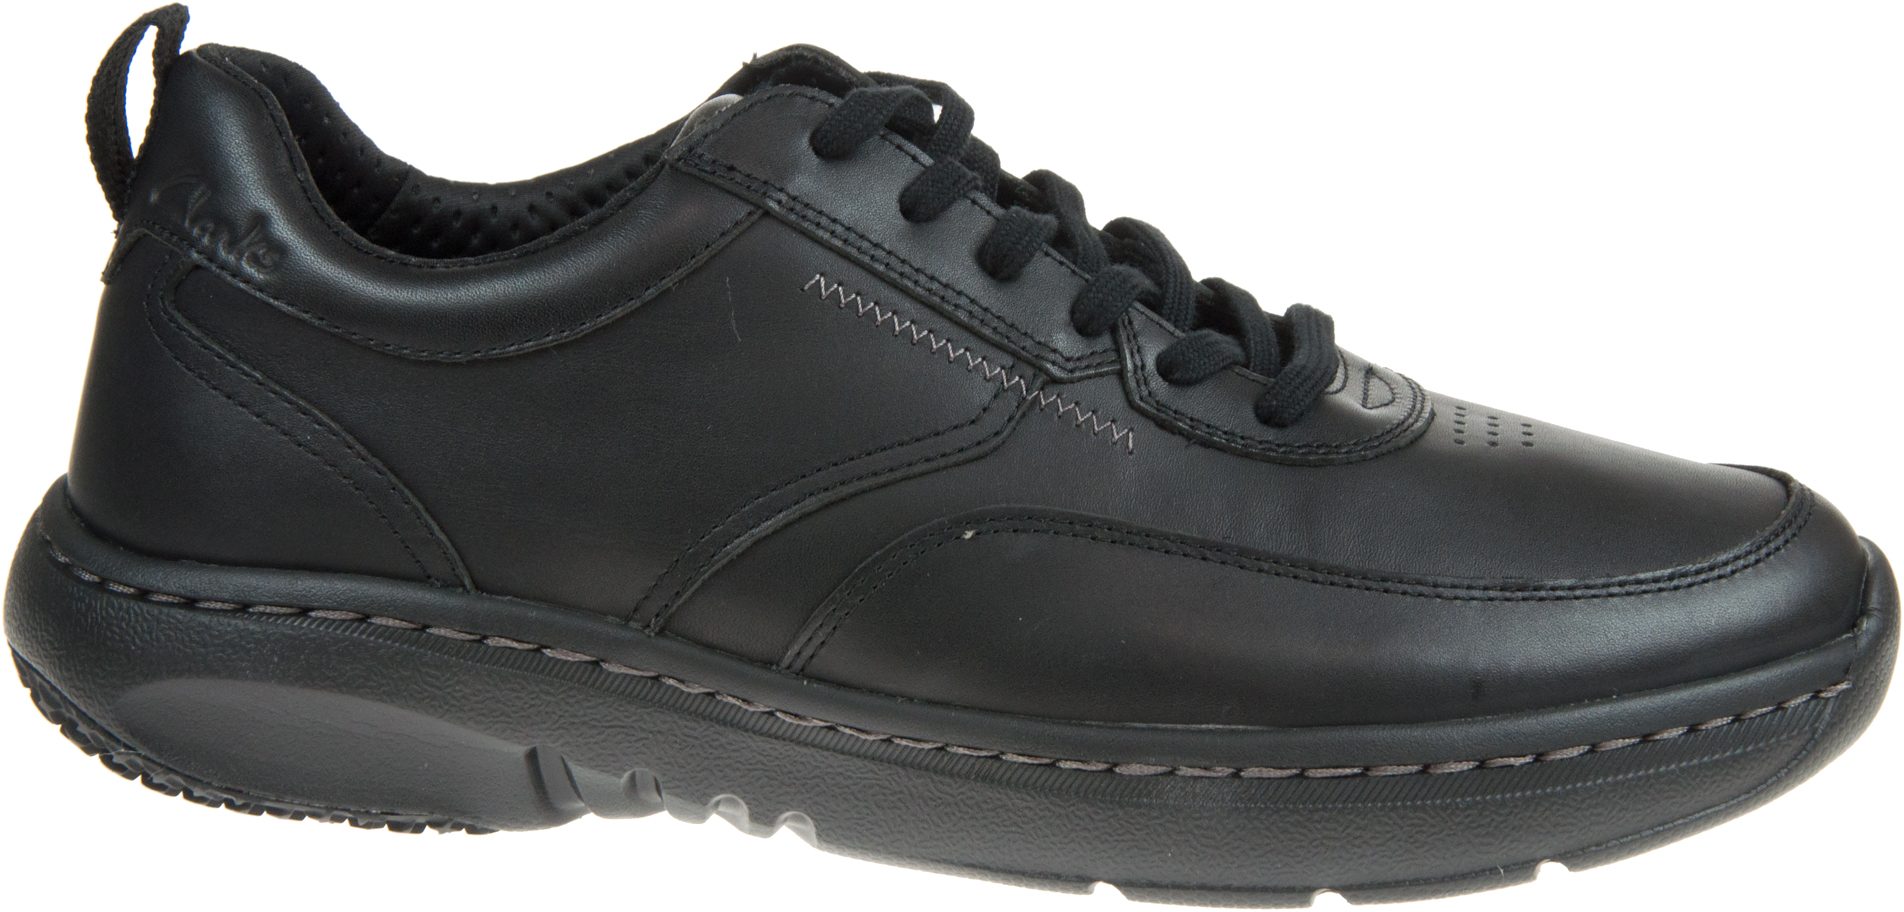 Clarks Pro Lace Black Leather 26175190 - Casual Shoes - Humphries Shoes